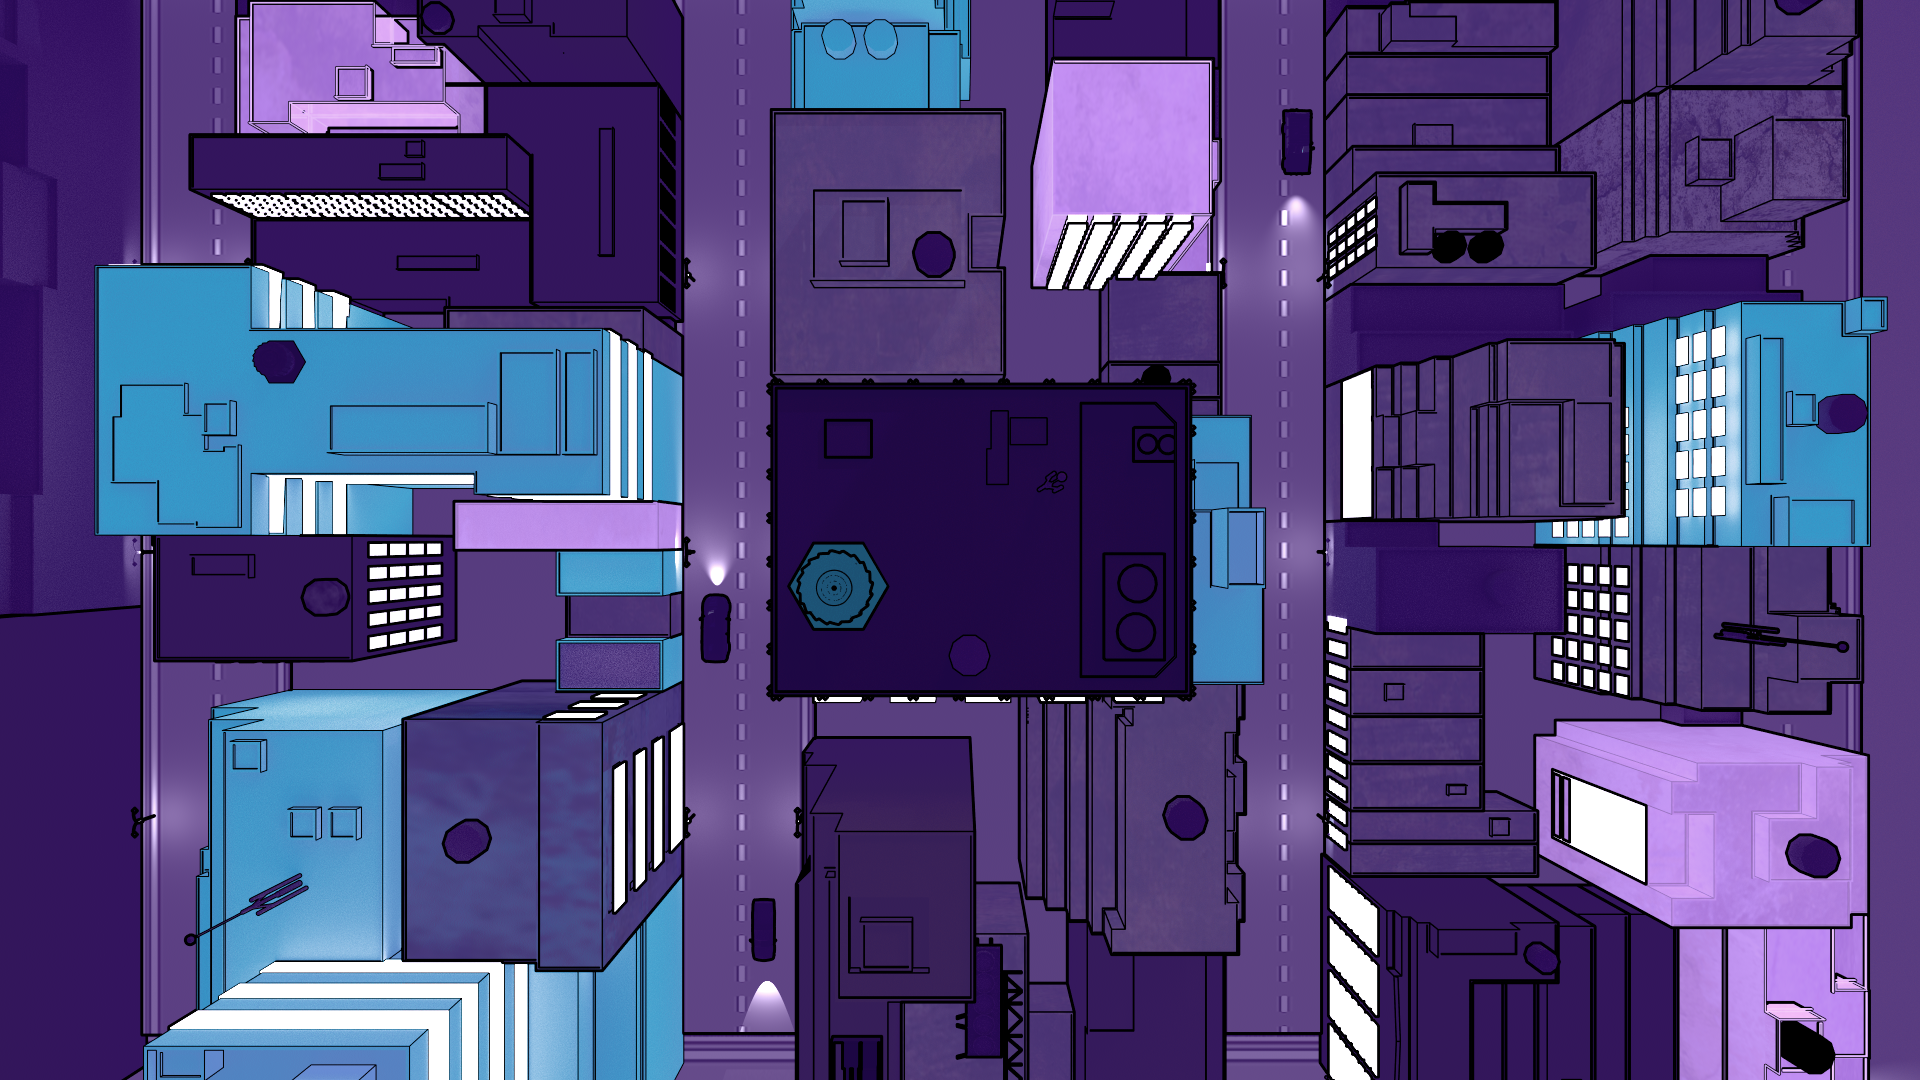 top down view of a city buildings in comic book style